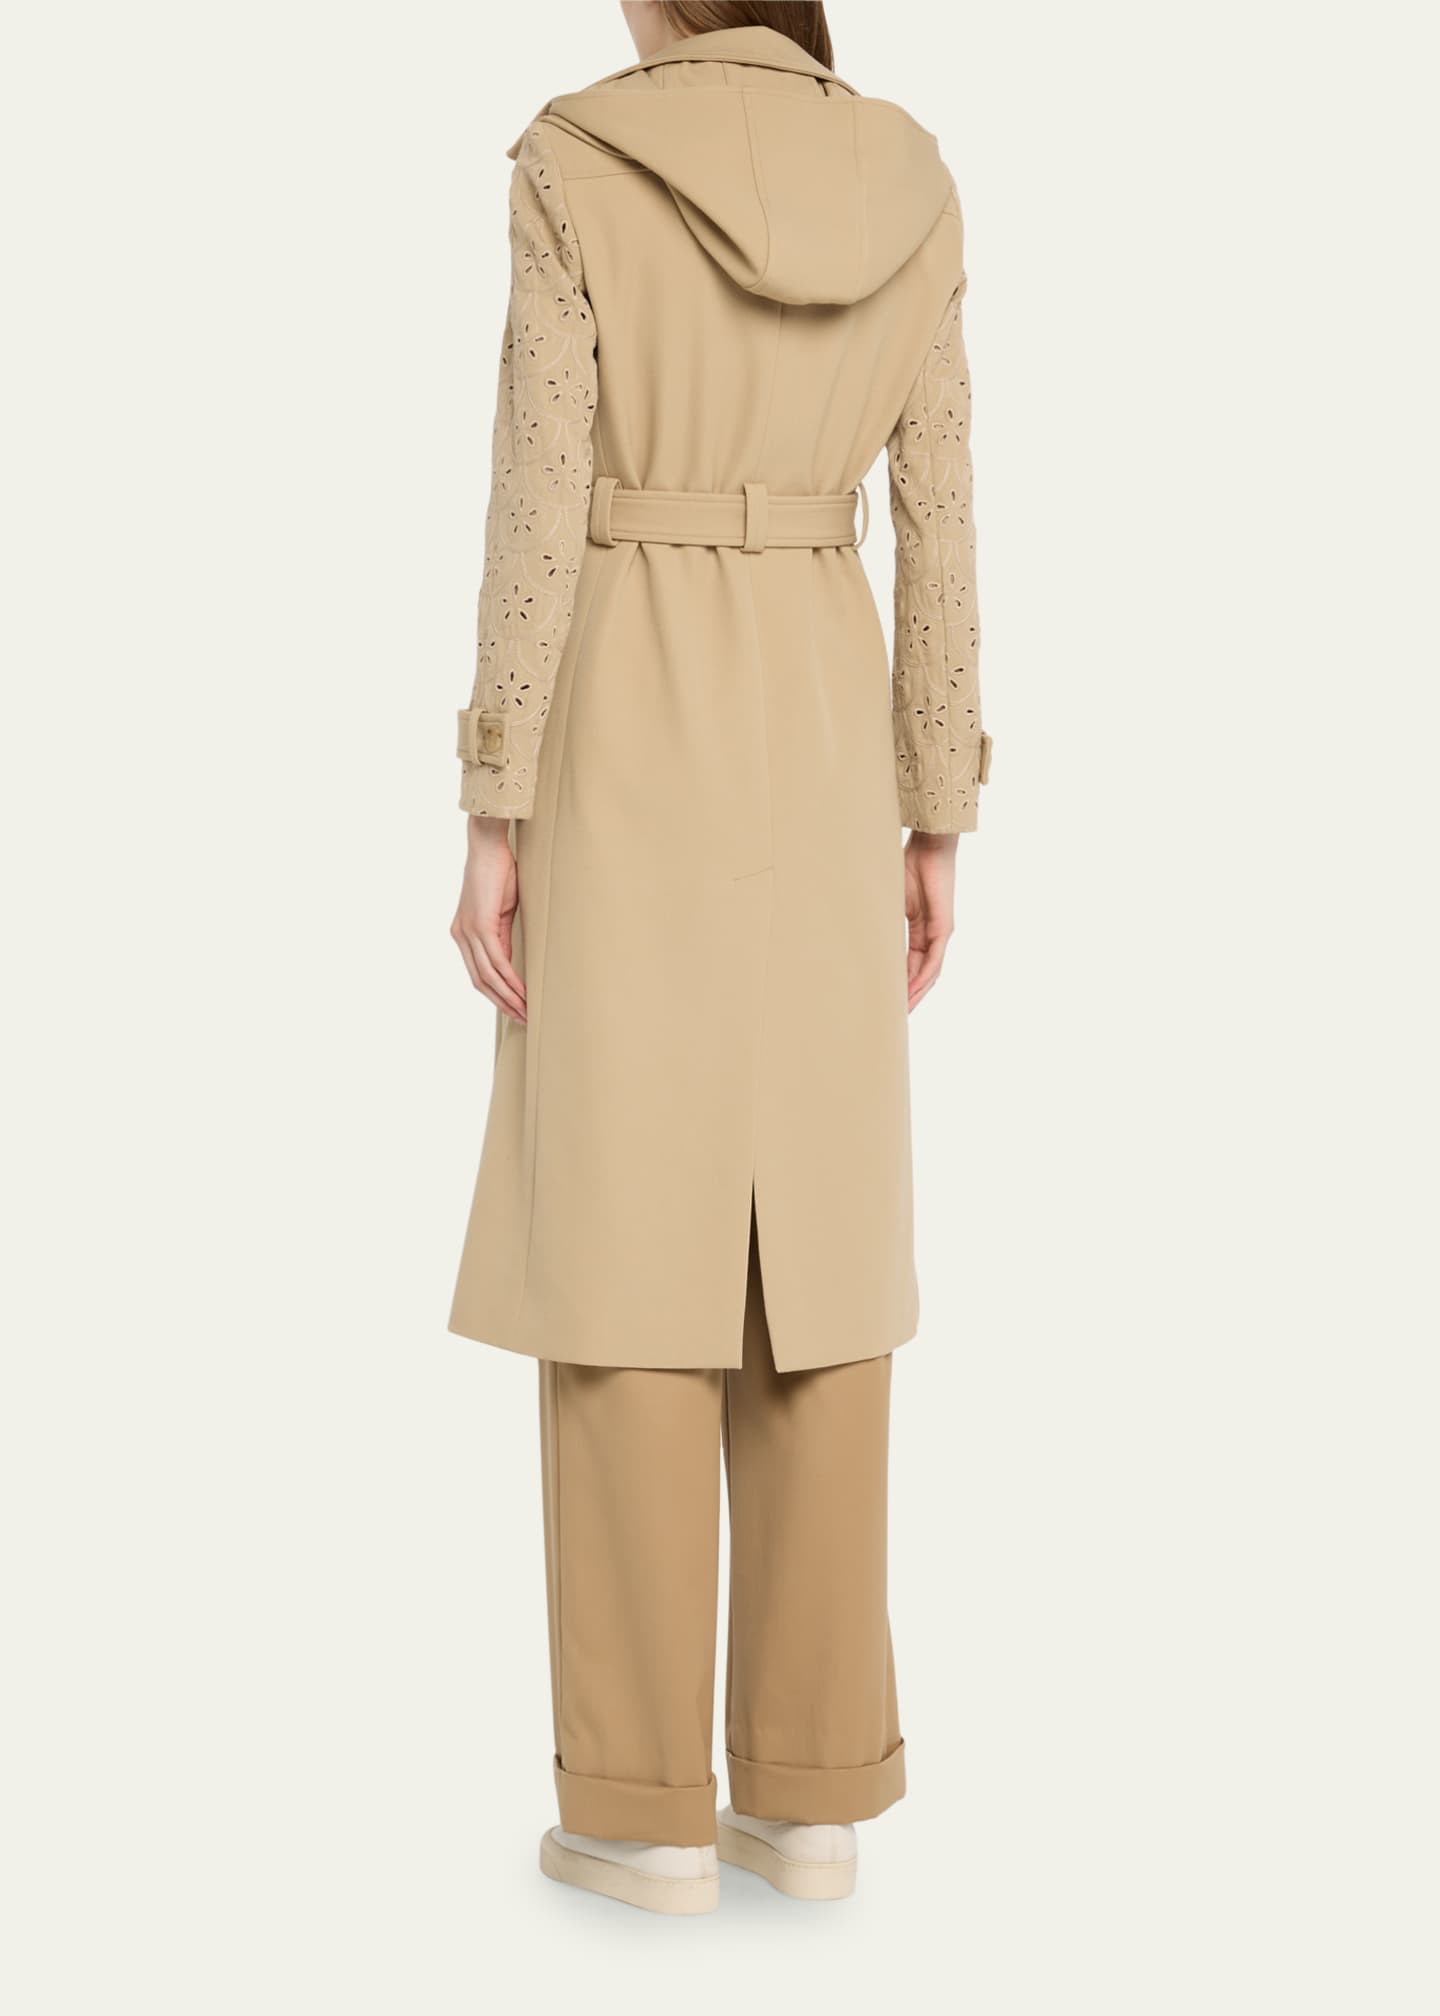 Chloe Belted Wool Trench Coat with Eyelet-Embroidered Sleeves